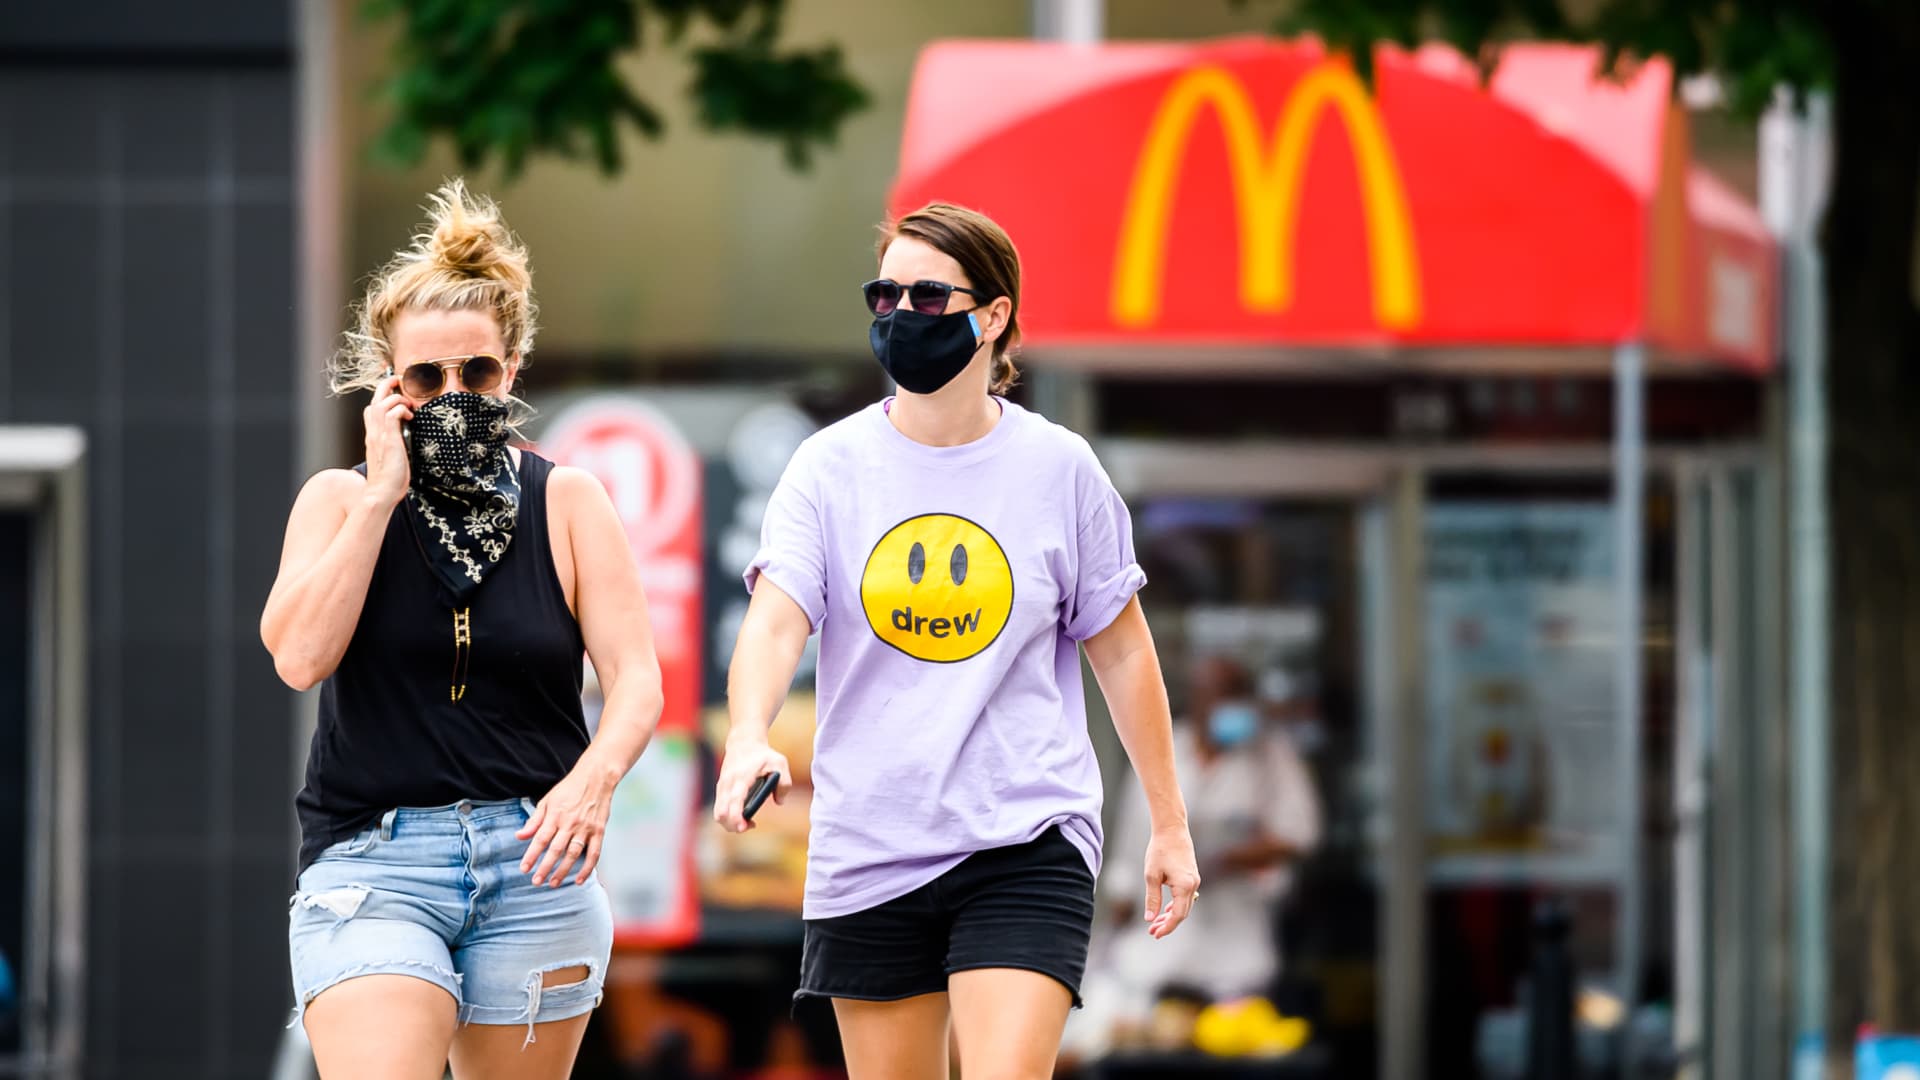 People wear protective face masks outside McDonald's in Union Square as the city continues Phase 4 of re-opening following restrictions imposed to slow the spread of coronavirus on July 30, 2020 in New York City.